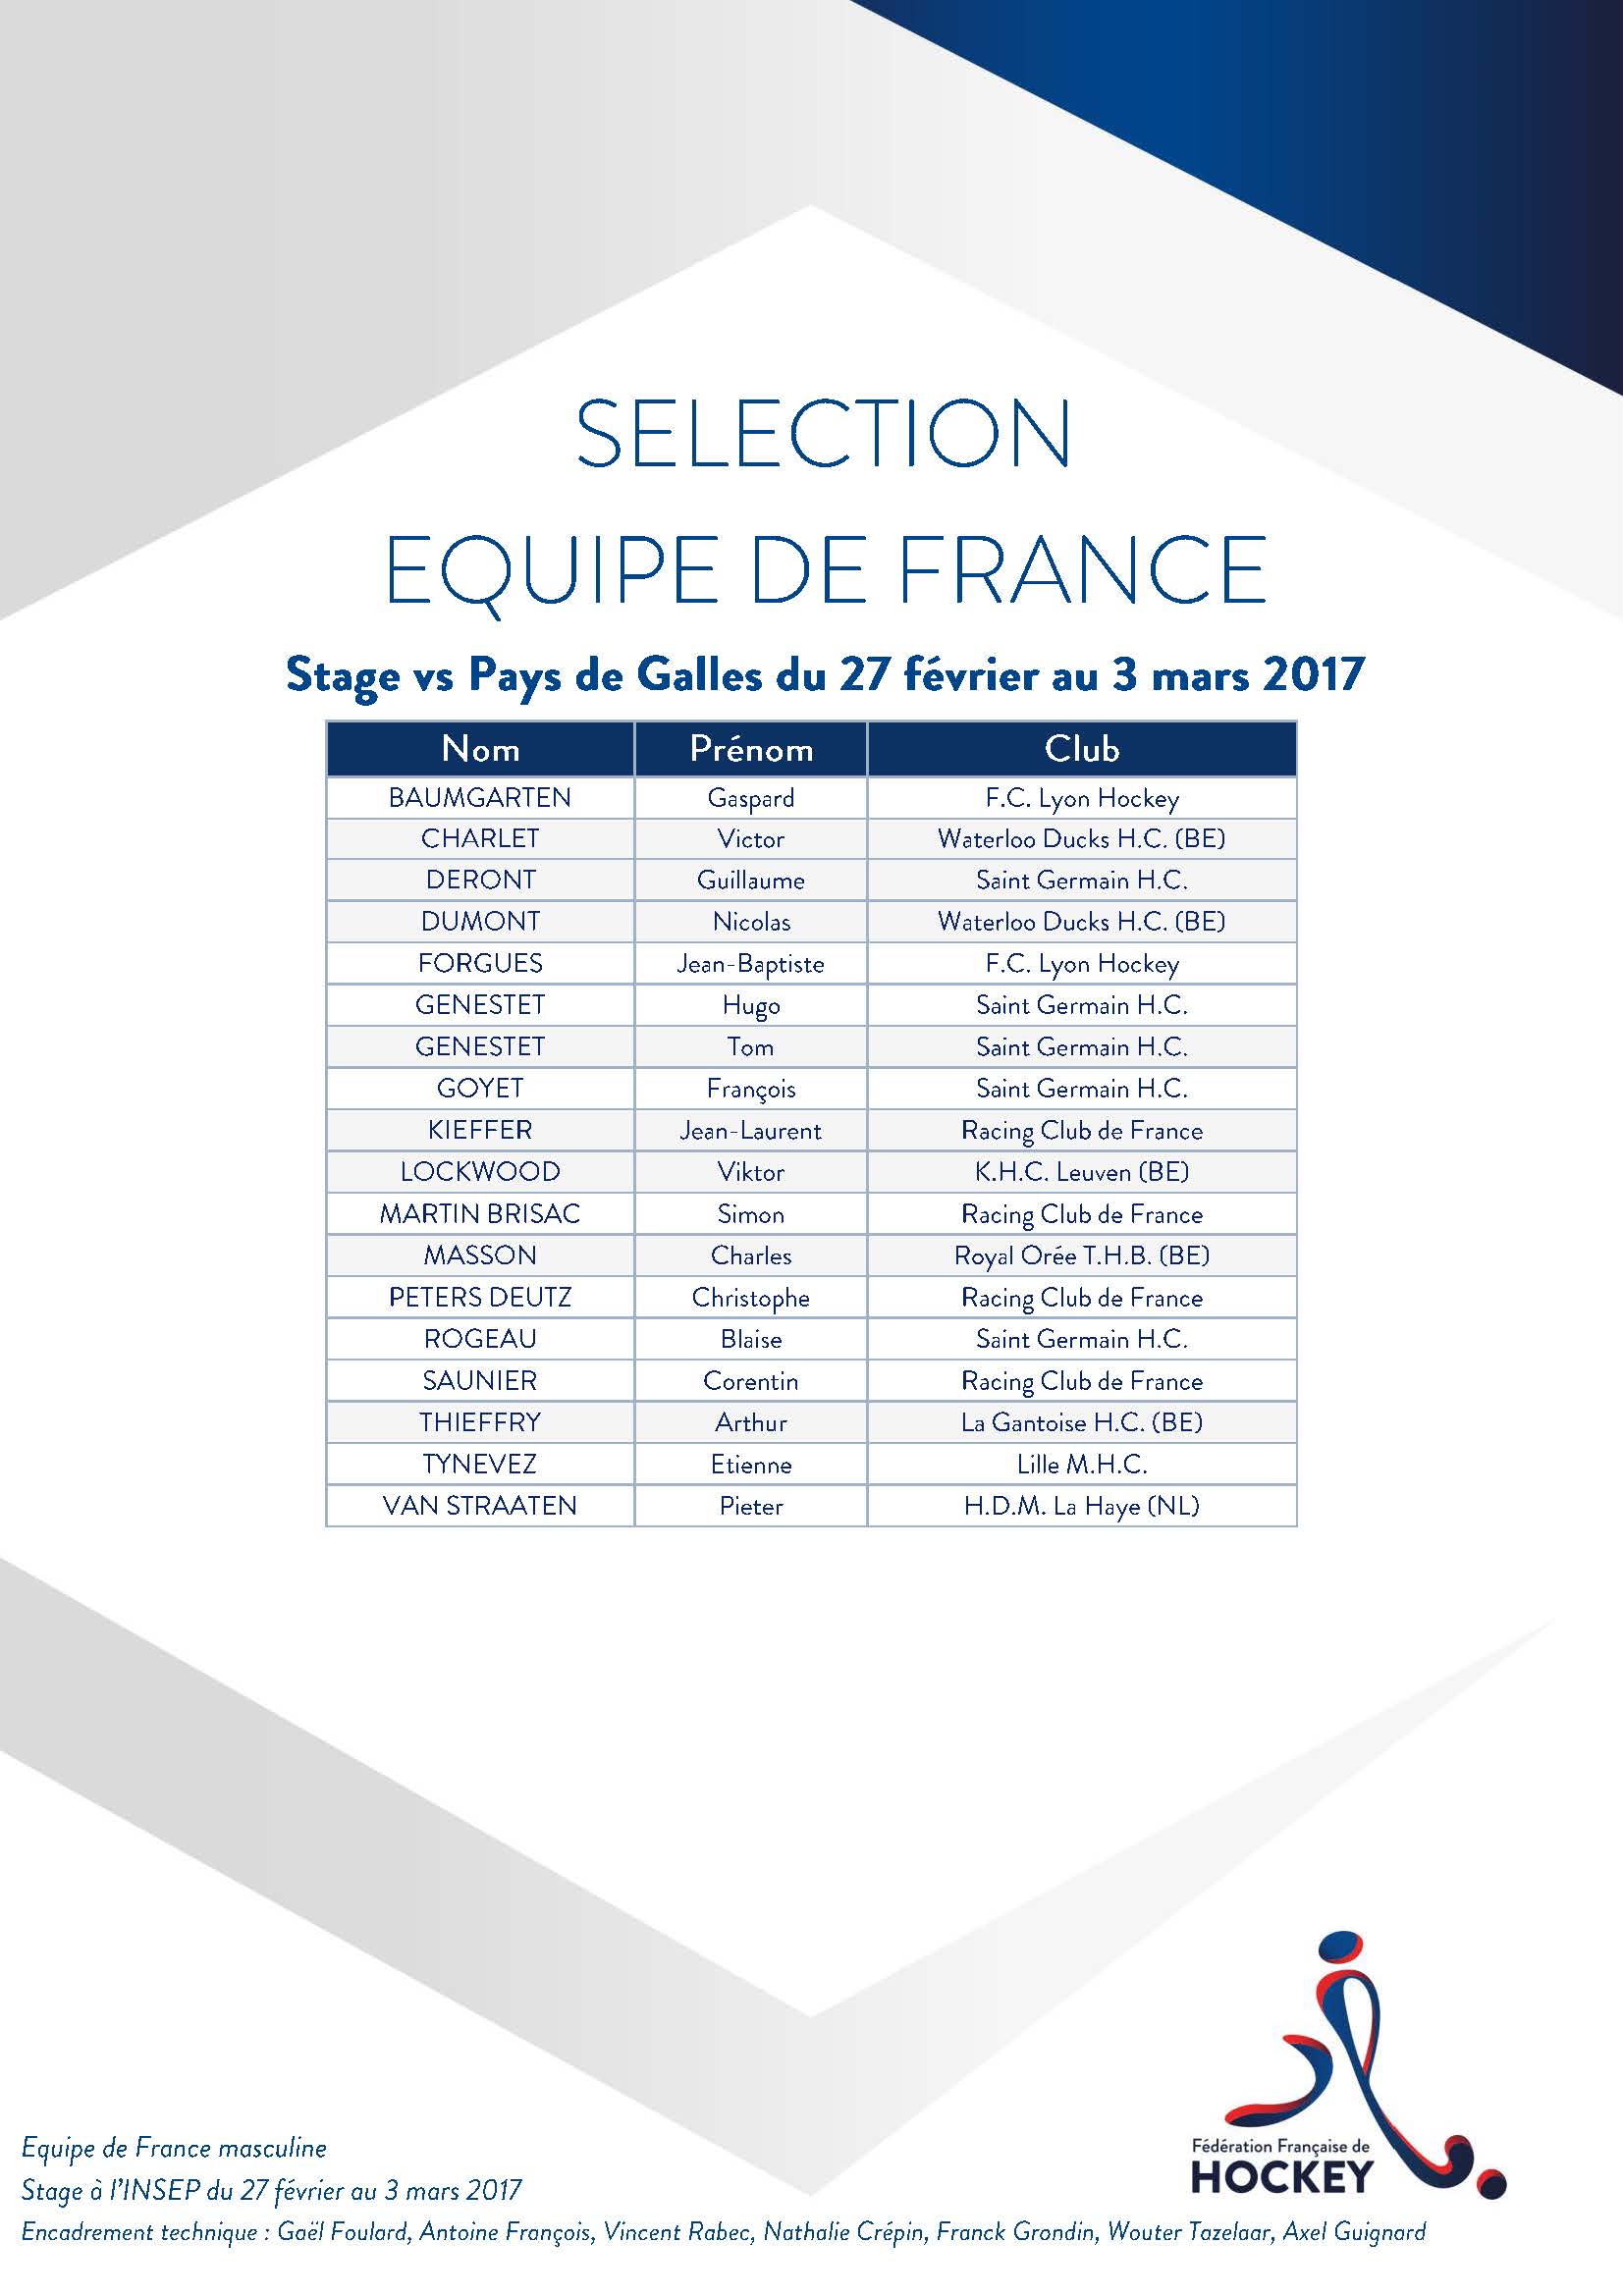 SELECTION EQUIPE DE FRANCE STAGE INSEP VS WALES.jpg